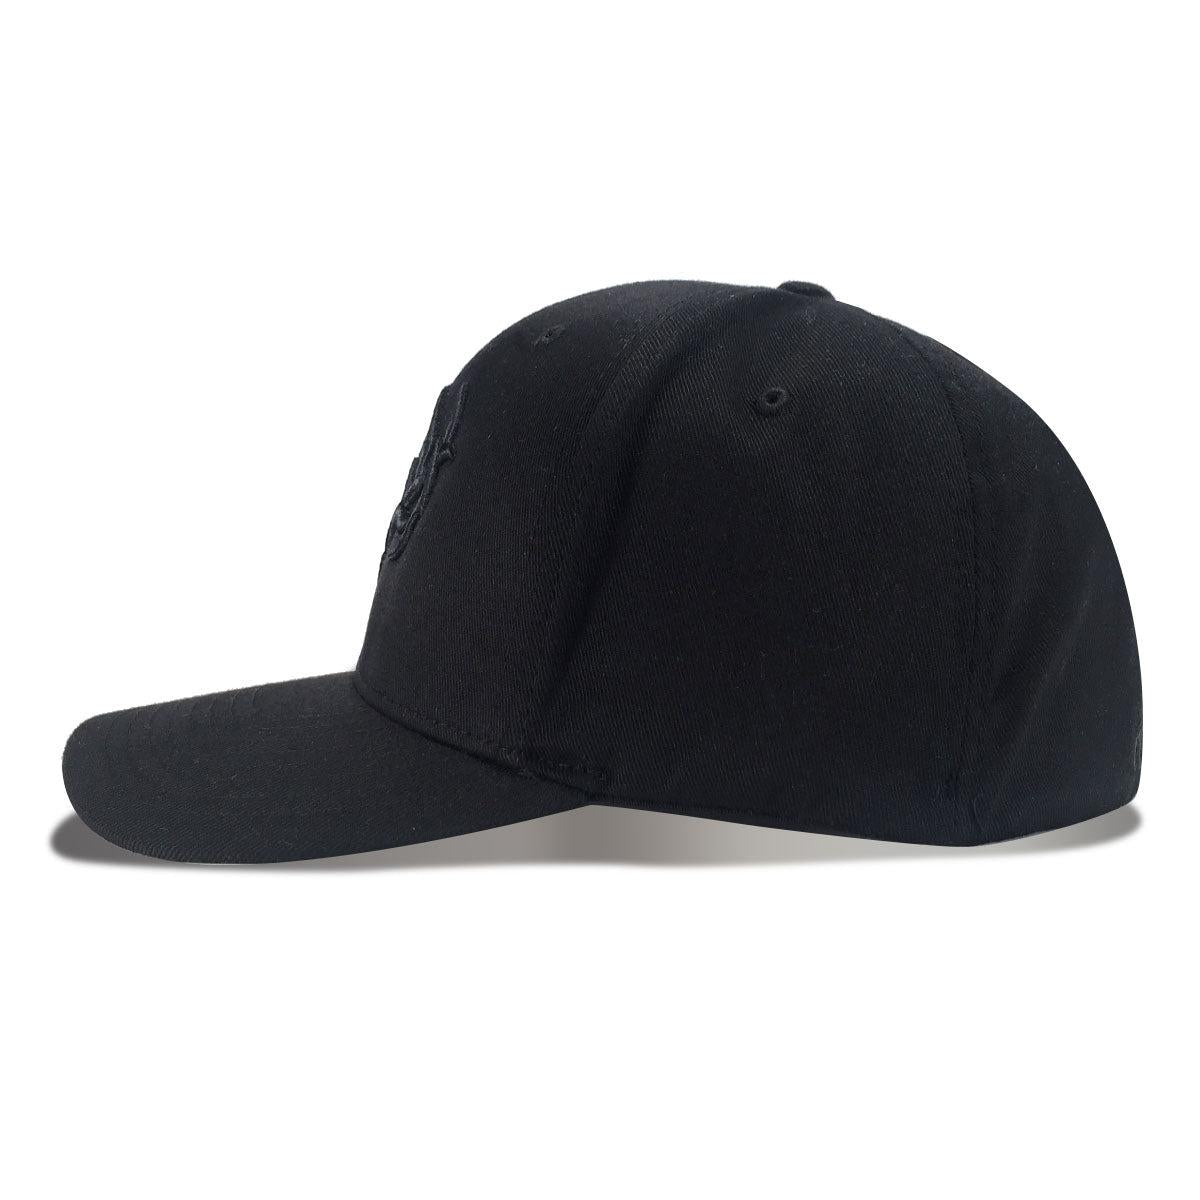 Eastwood Black Flex Hat (Youth/Adult to XXL Sizes)